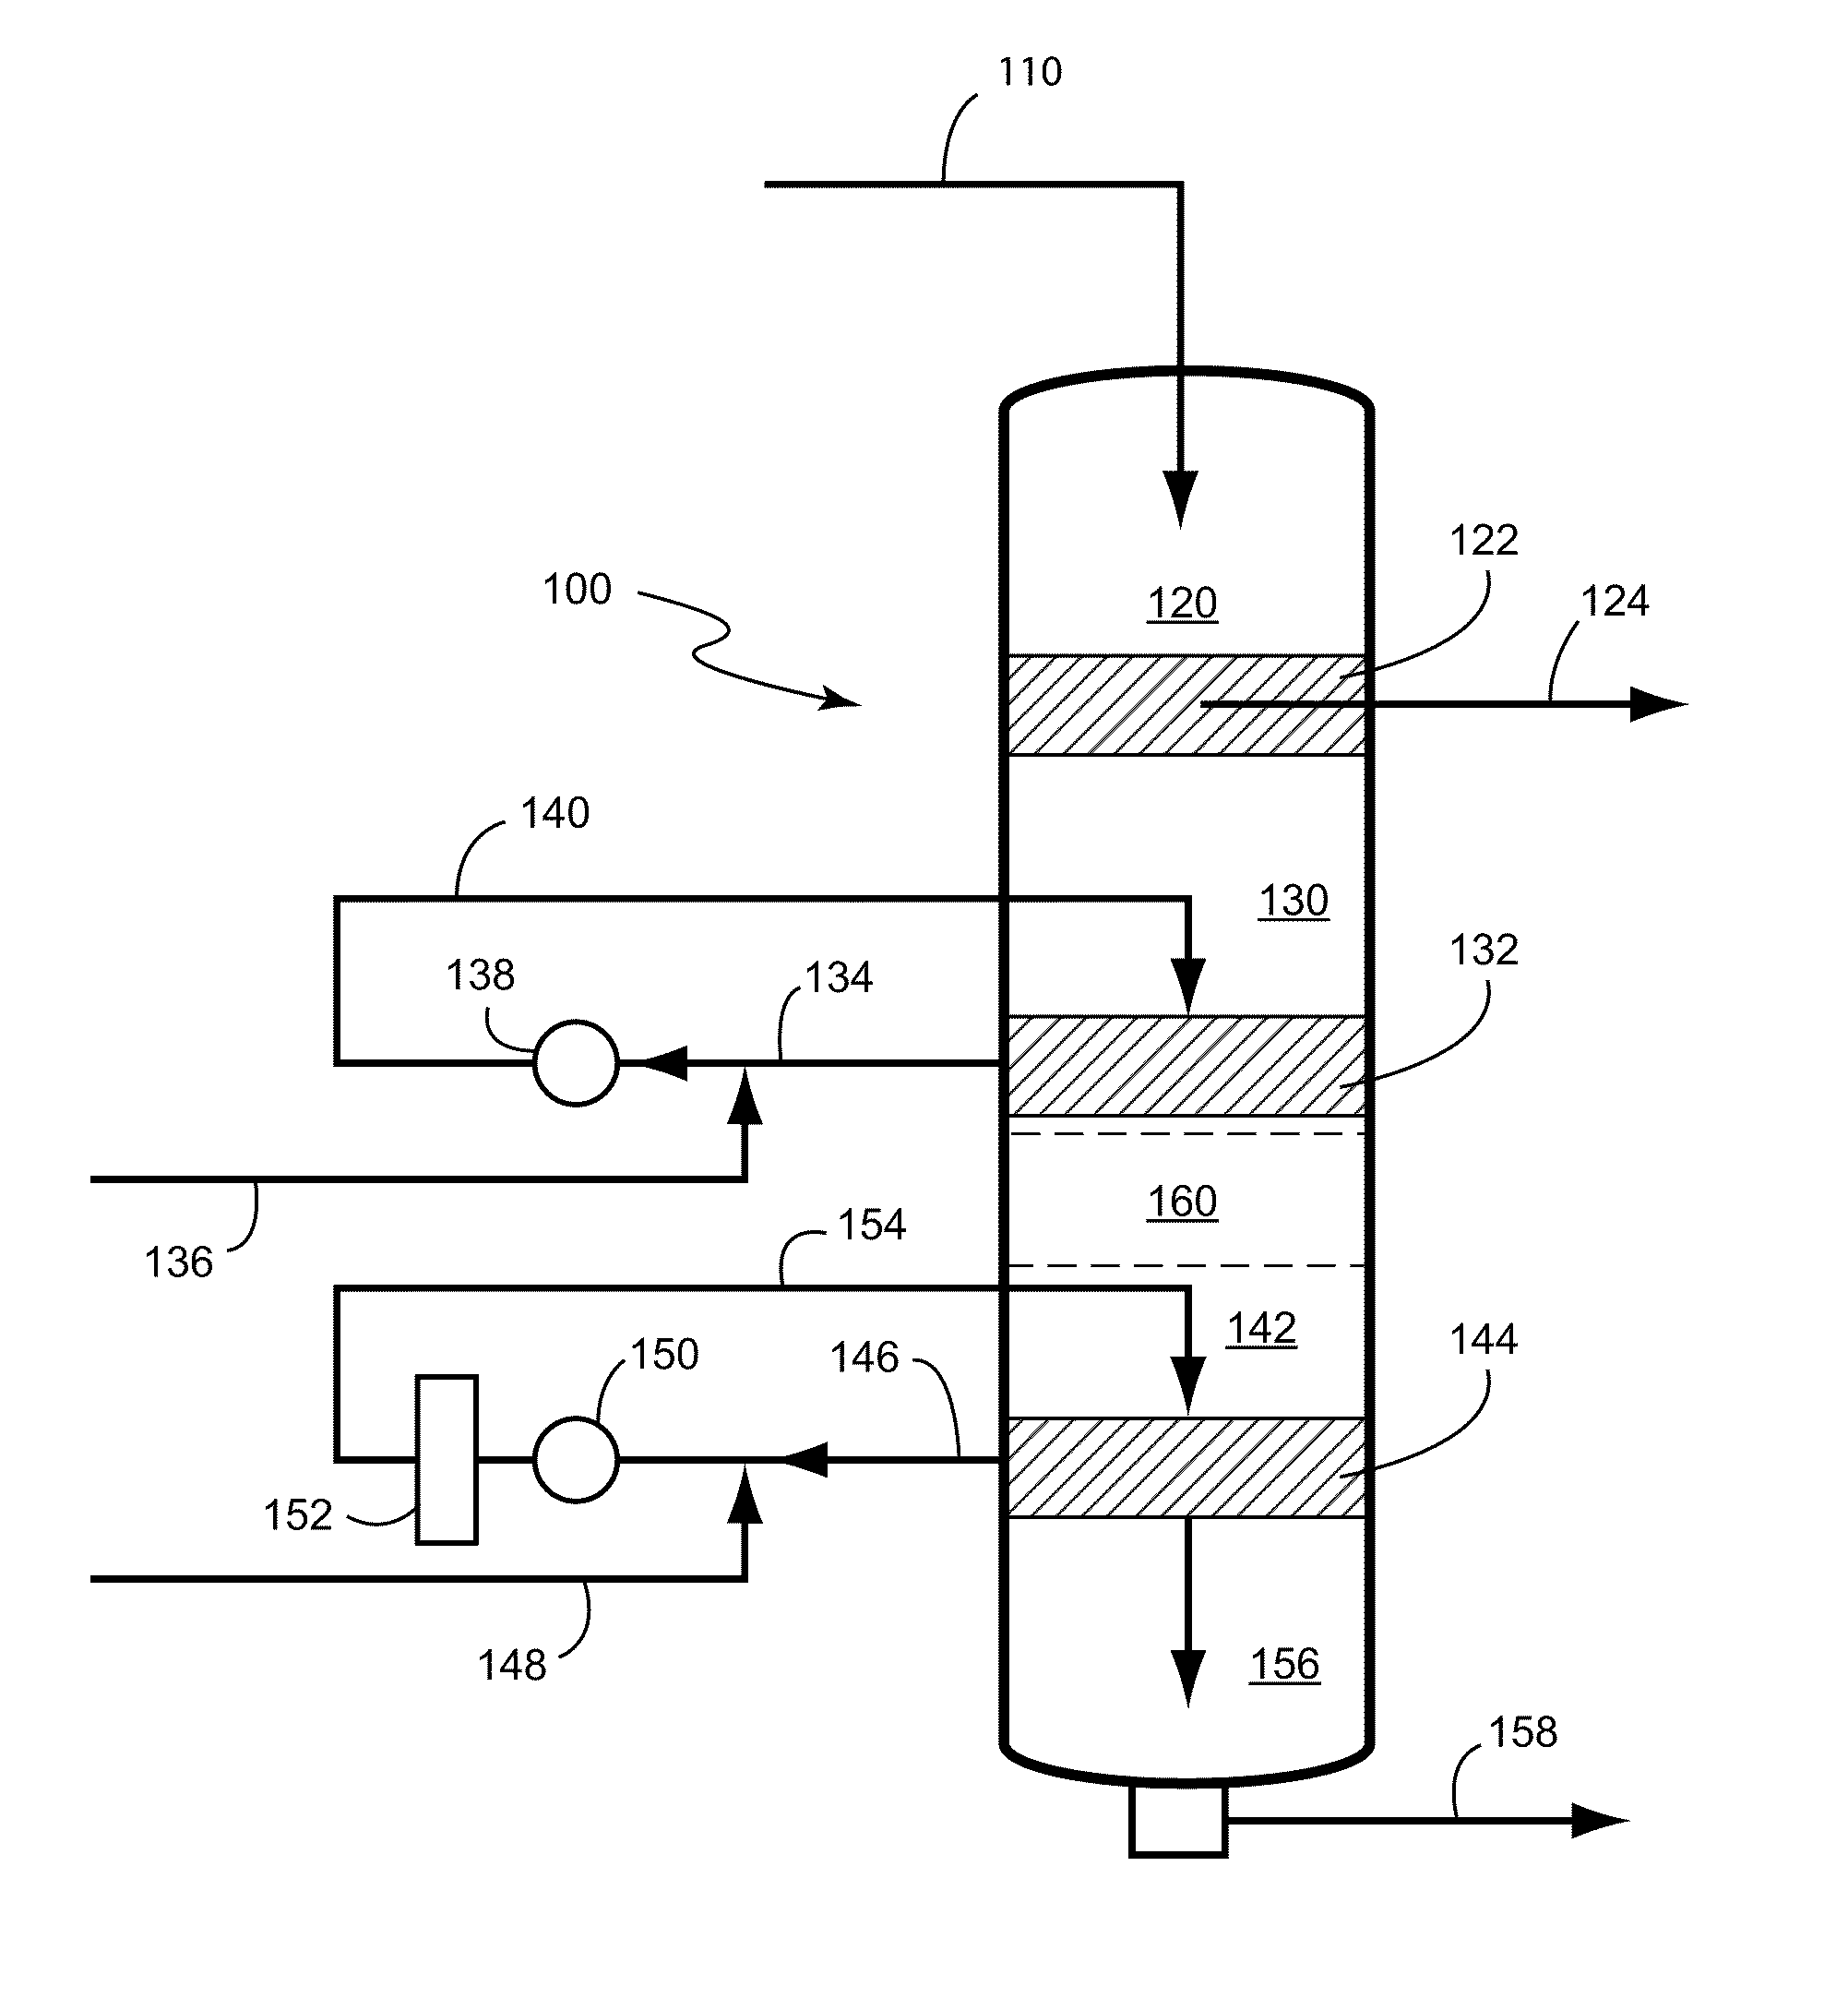 Apparatus and method for hydrolysis of cellulosic material in a multi-step process to produce C5 and C6 sugars using a single vessel